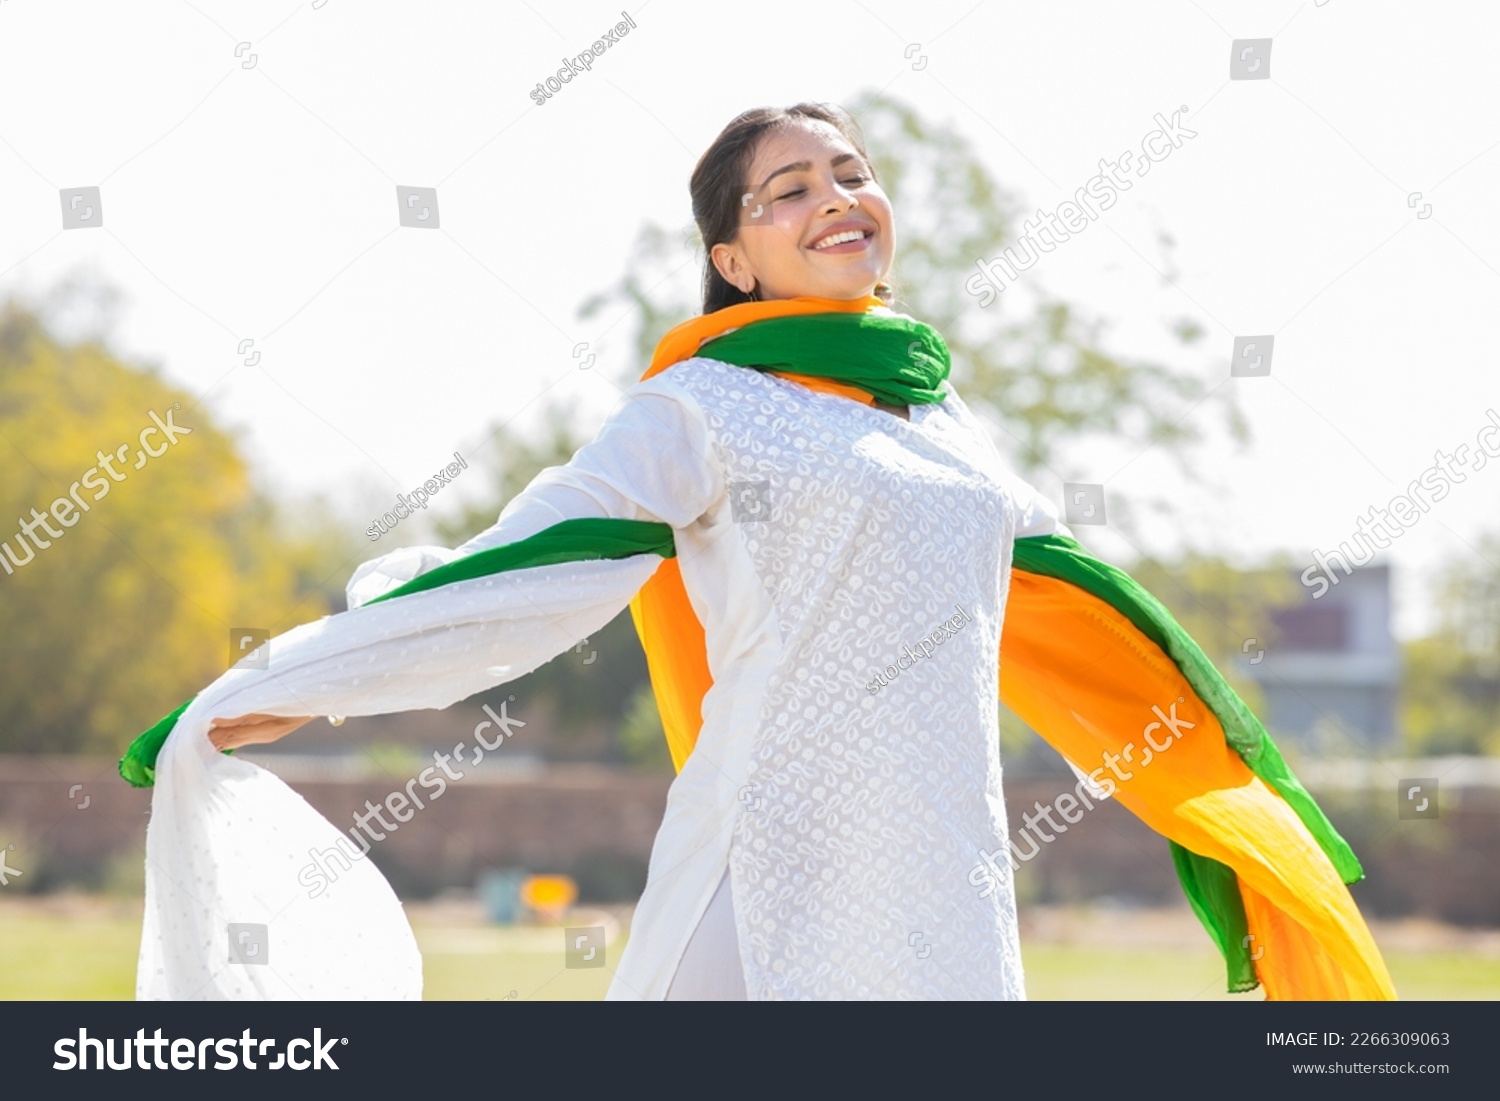 Portrait of happy young indian woman wearing traditional white kurta and tricolor duppata running at park. celebrating Independence day or Republic day. #2266309063